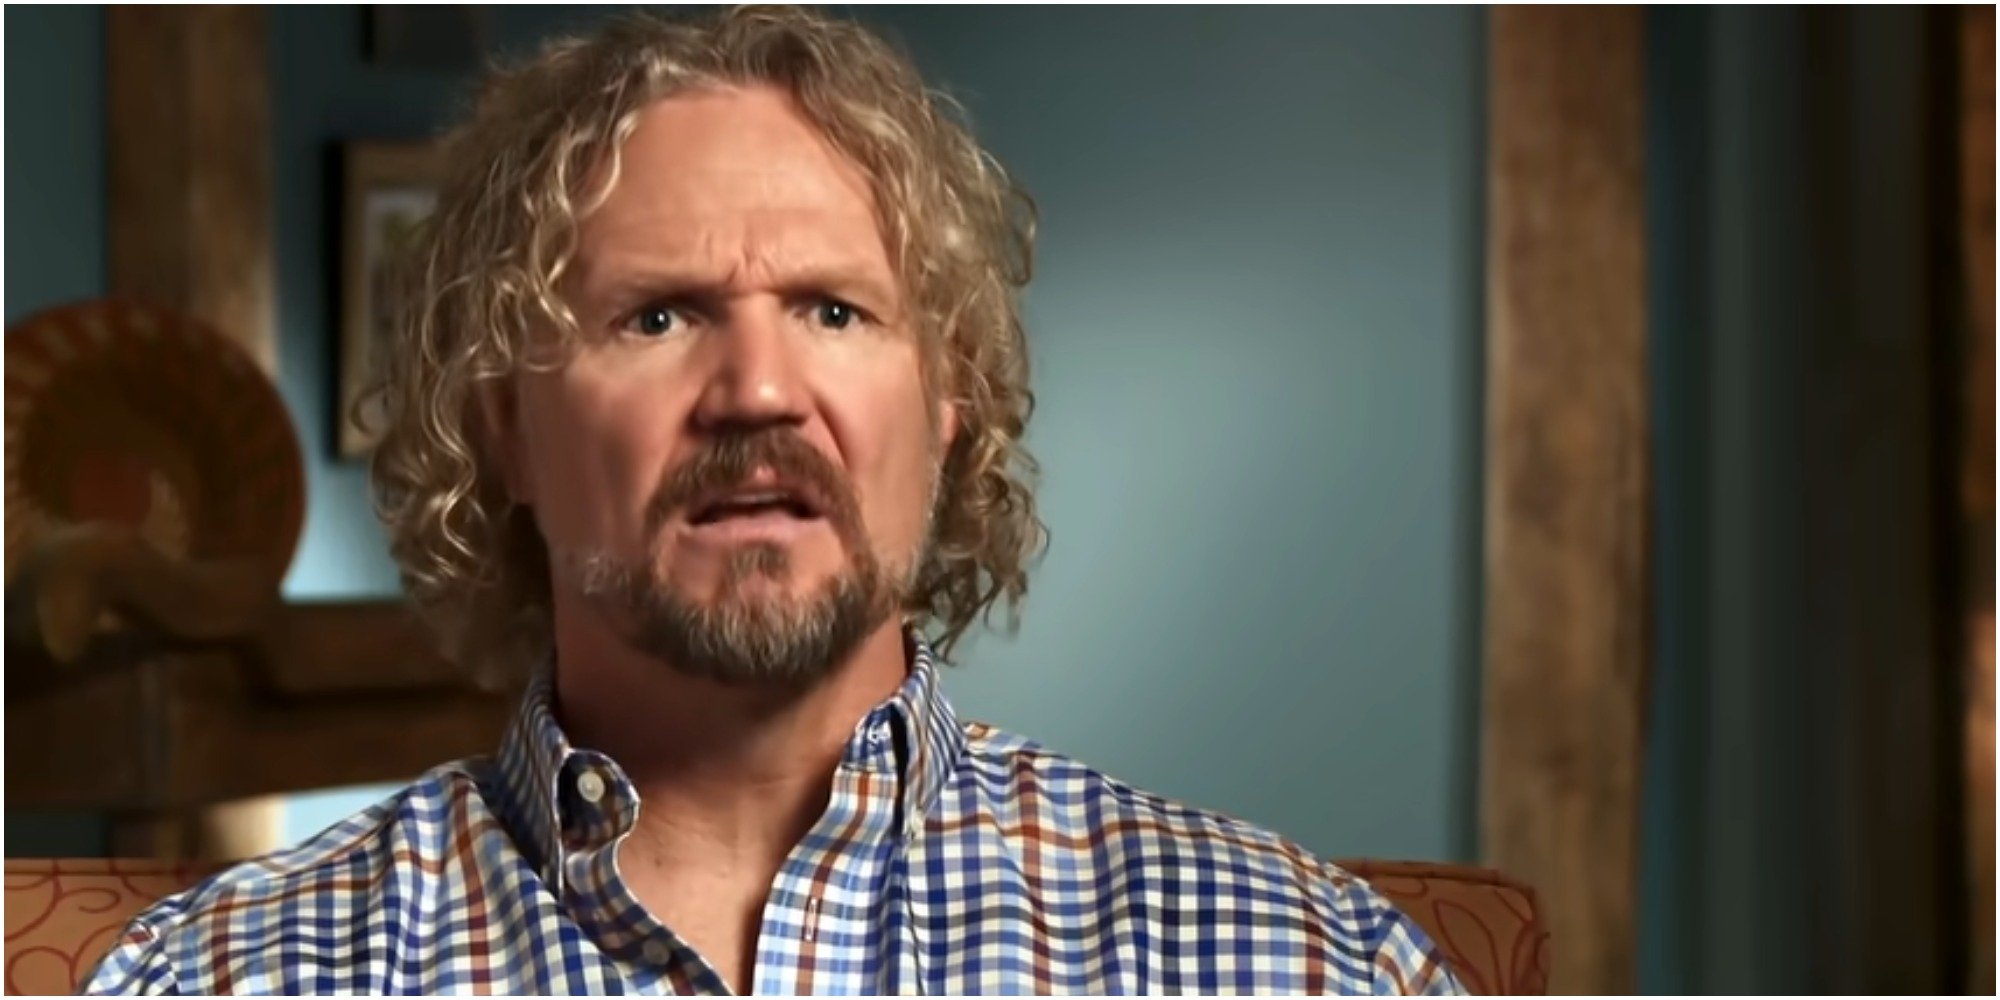 Kody Brown is seated in a confessional interview for "Sister Wives."